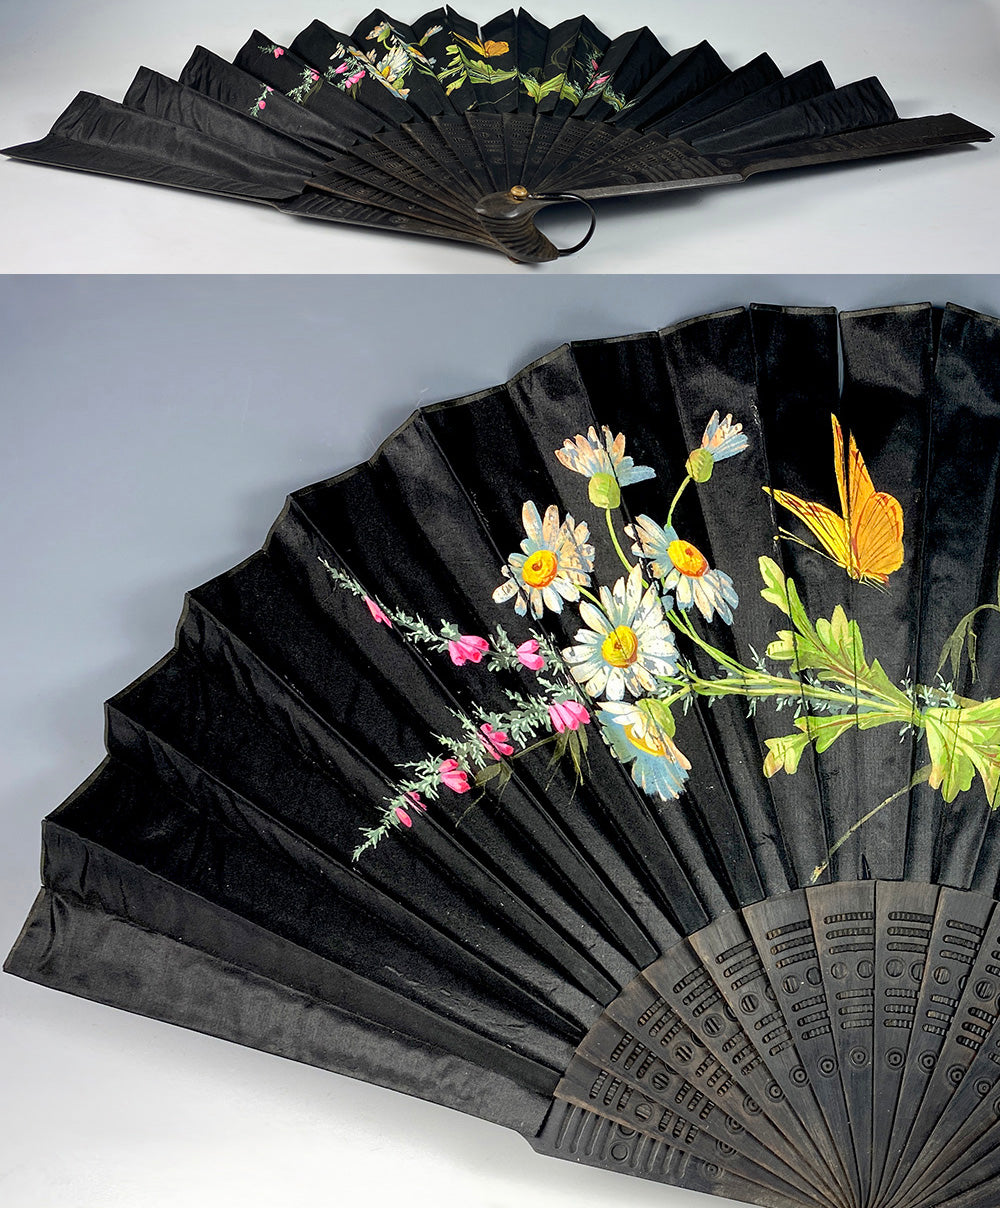 Antique French Hand Painted Silk and Wood Hand Fan 28cm Guards, c.1890-1910